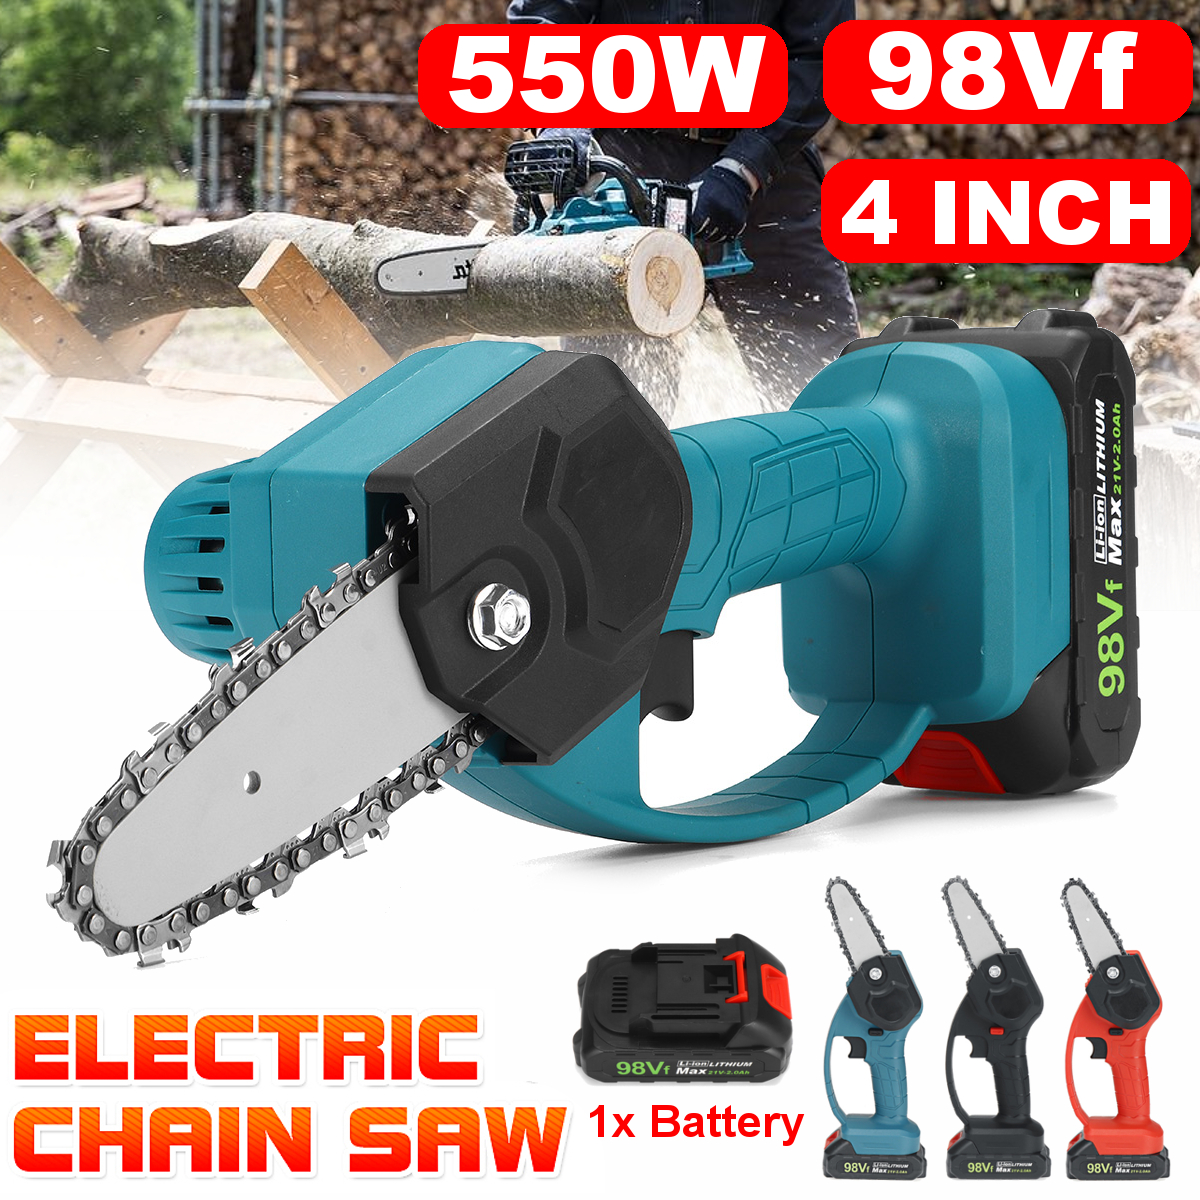 550W-98VF-4inch-Rechargeable-Electric-Chain-Saw-Woodworking-Cutting-Saw-W-1pc-Battery-1792714-1